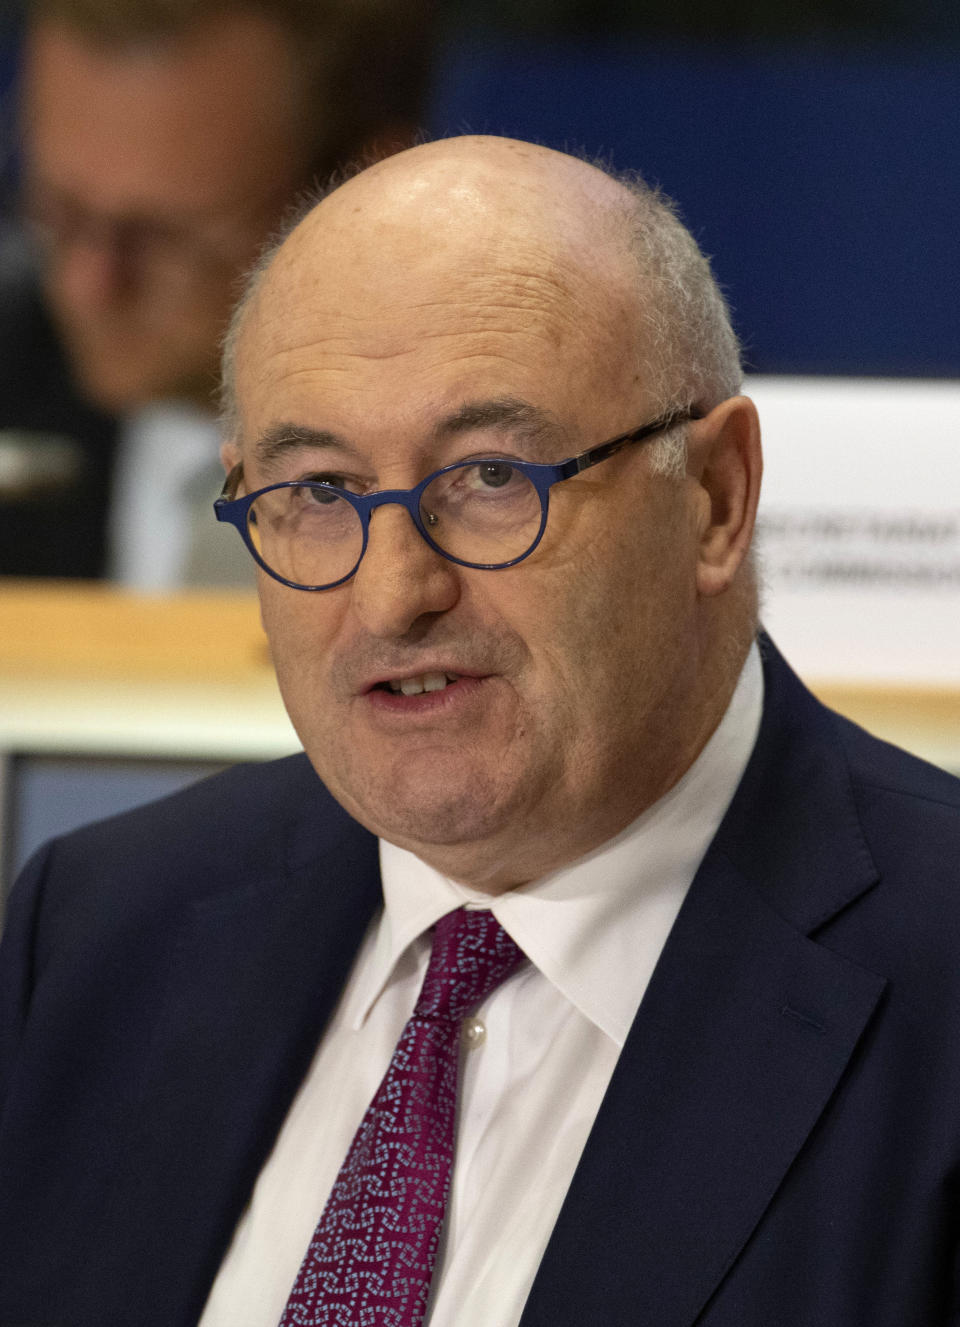 European Commissioner designate for Trade Phil Hogan makes his opening statement during his hearing at the European Parliament in Brussels, Monday, Sept. 30, 2019. (AP Photo/Virginia Mayo)